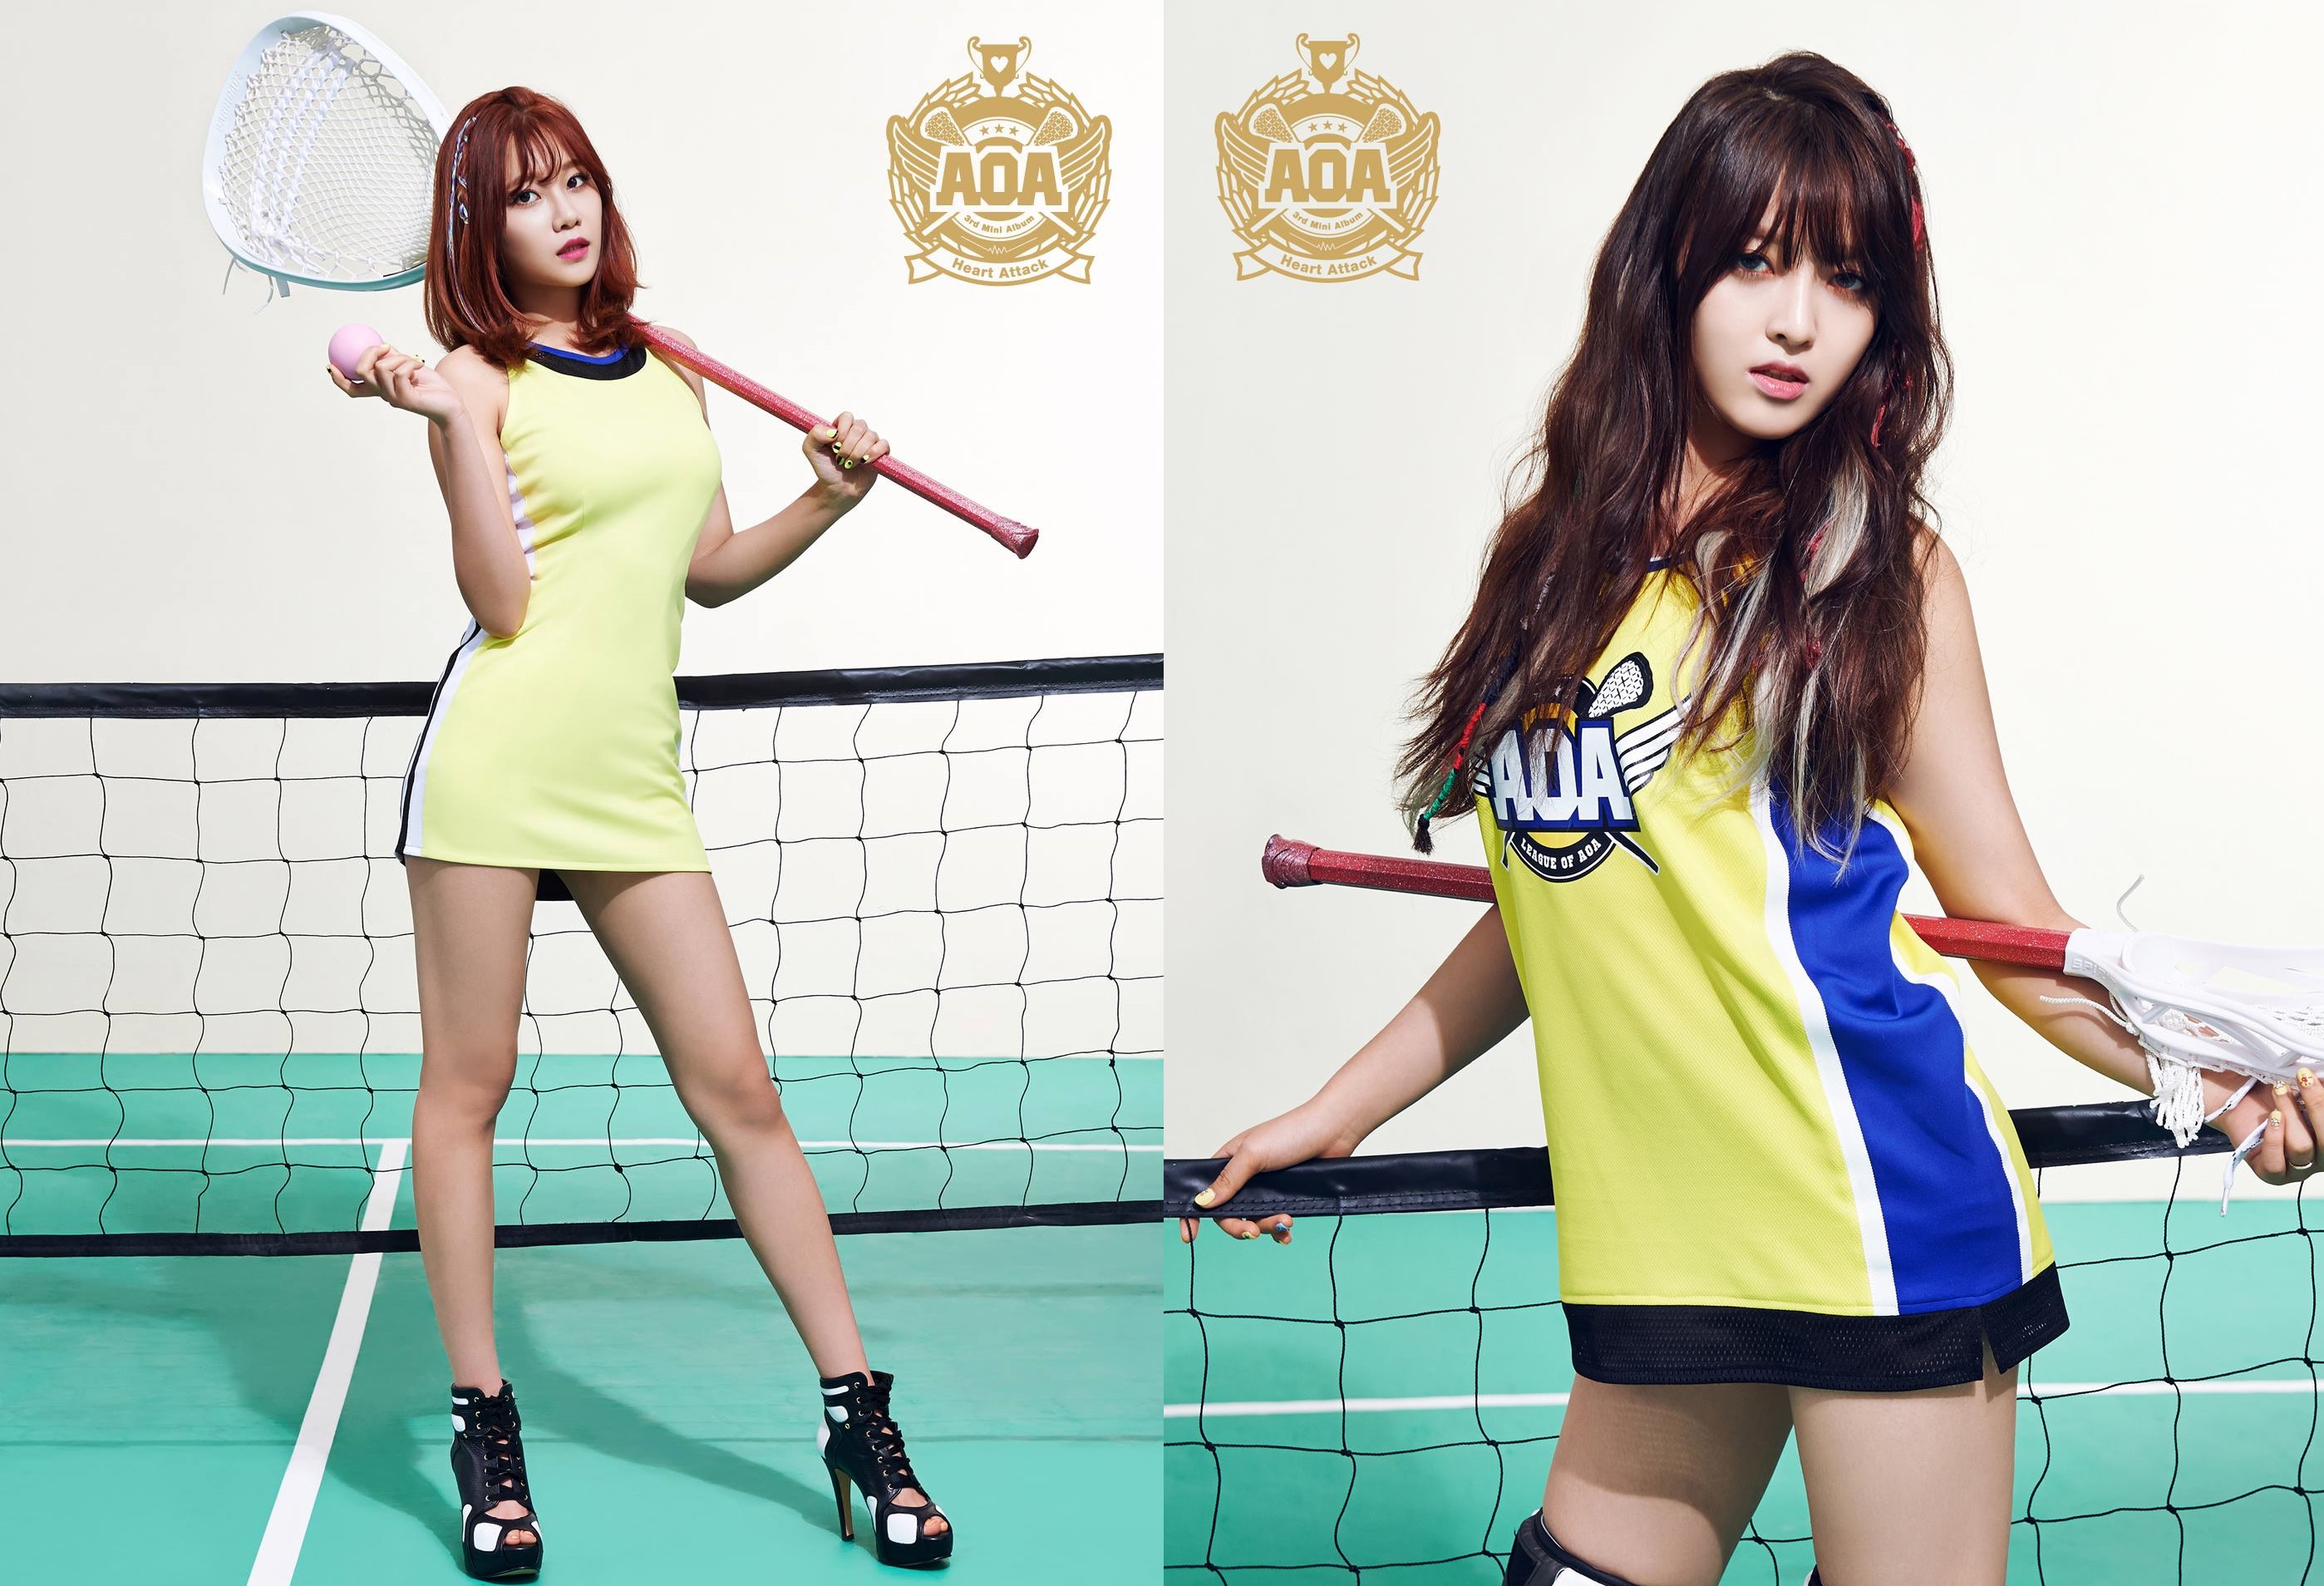 AOA Releases Individual Heart Attack Photo Teasers For Yuna And Chanmi.